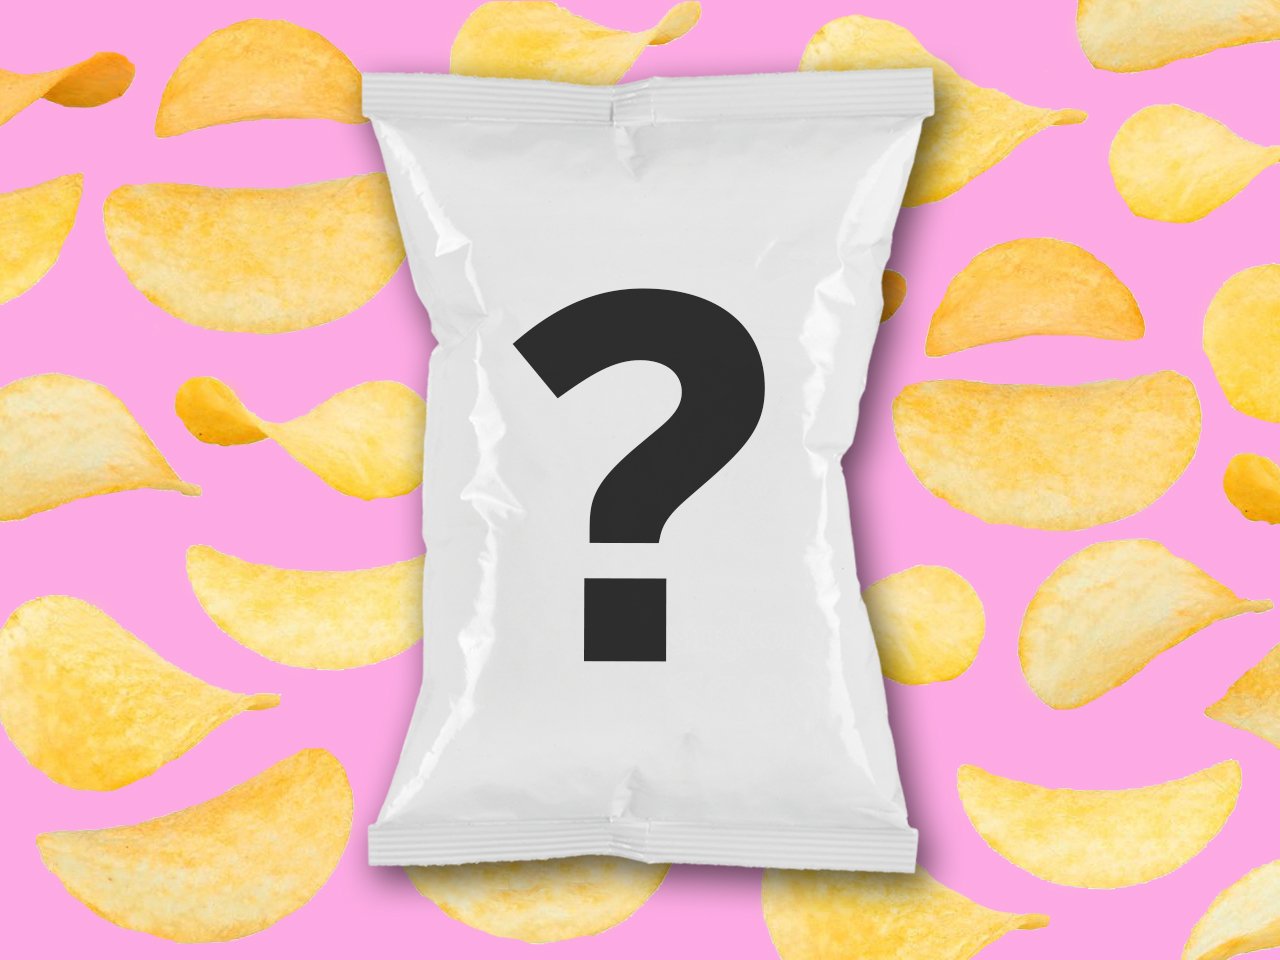 We tried Canada's new chip flavours in a taste test